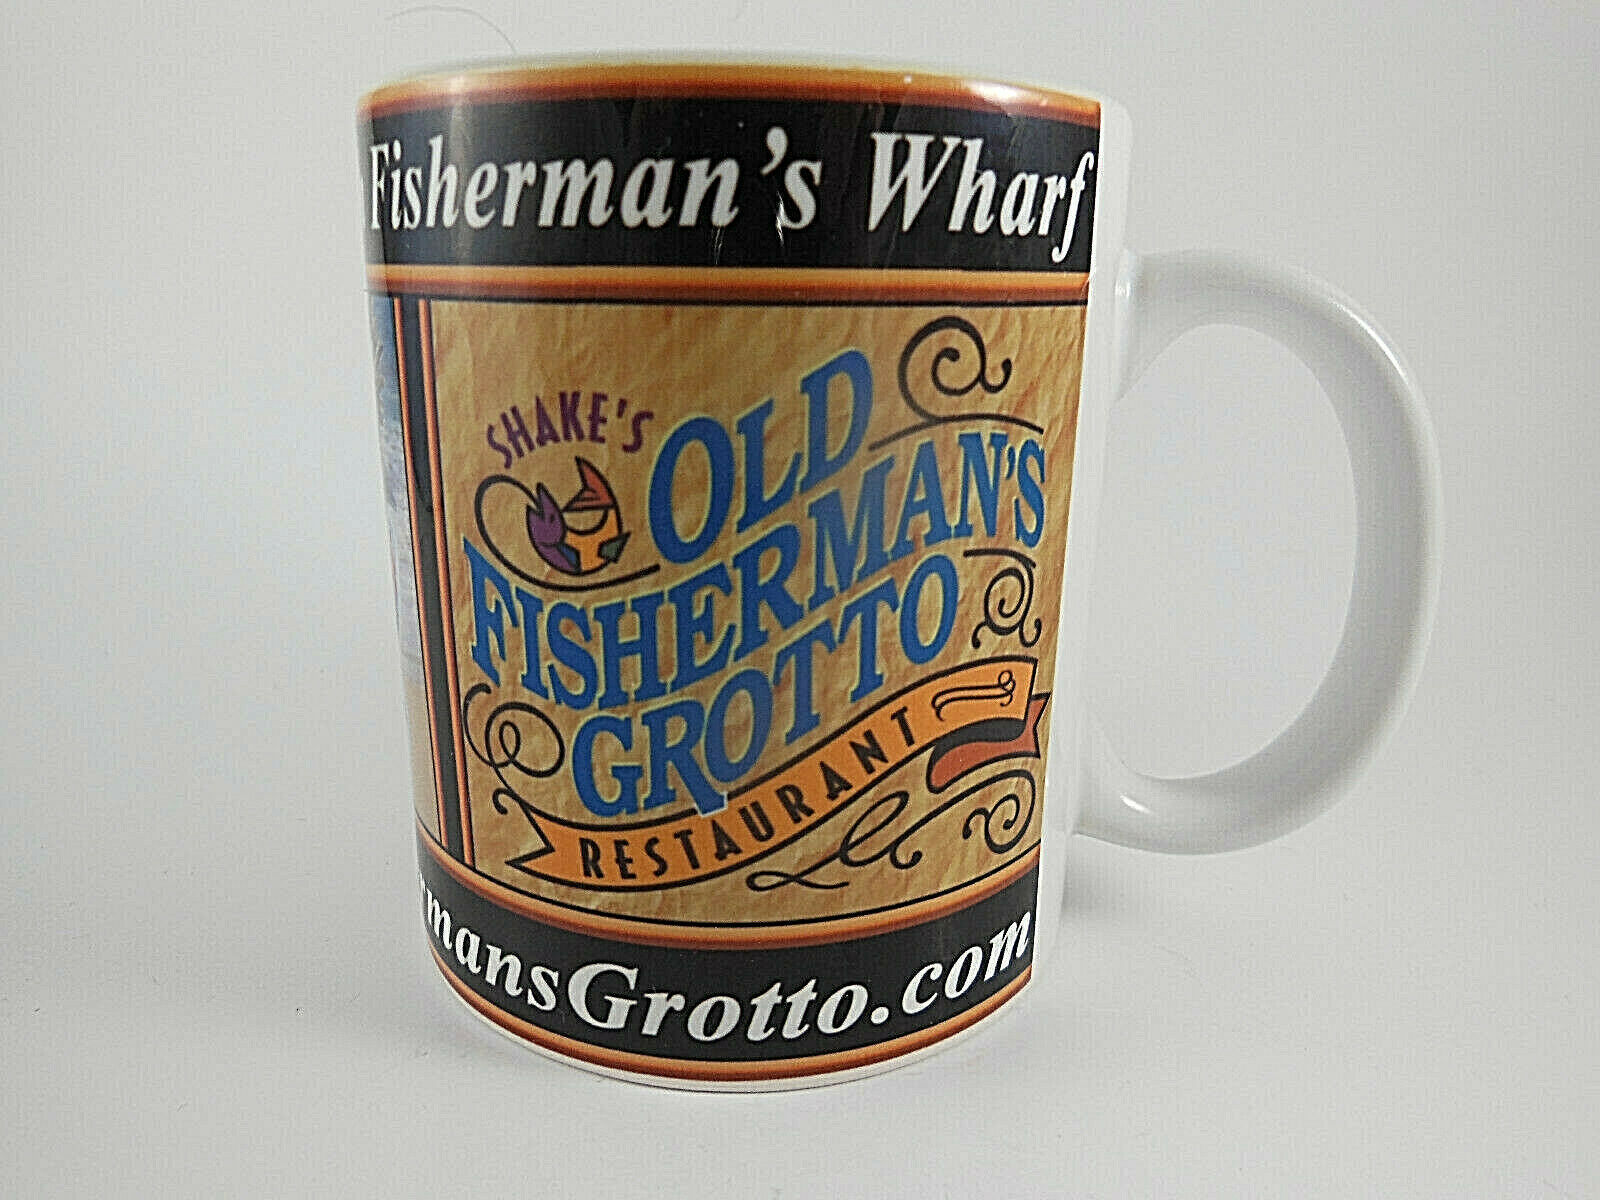 Primary image for Old Fisherman's Wharf Grotto SAN FRANCISCO restaurant cup mug Orca Coatings